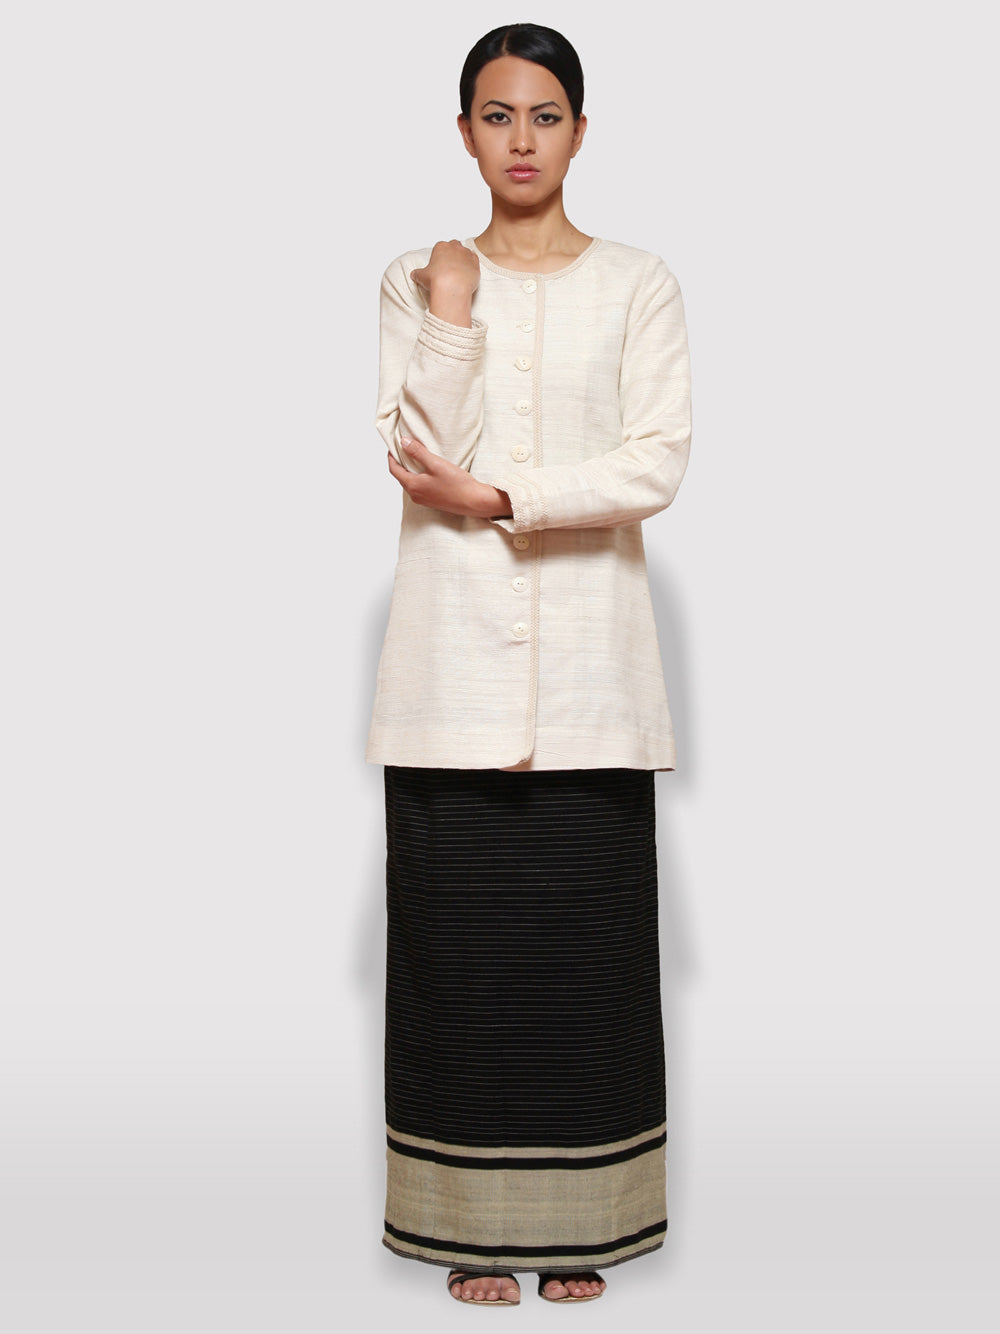 Handwoven Pinstripe wrap-around skirt inspired by traditional Meitei attire designed by Khumanthem Atelier